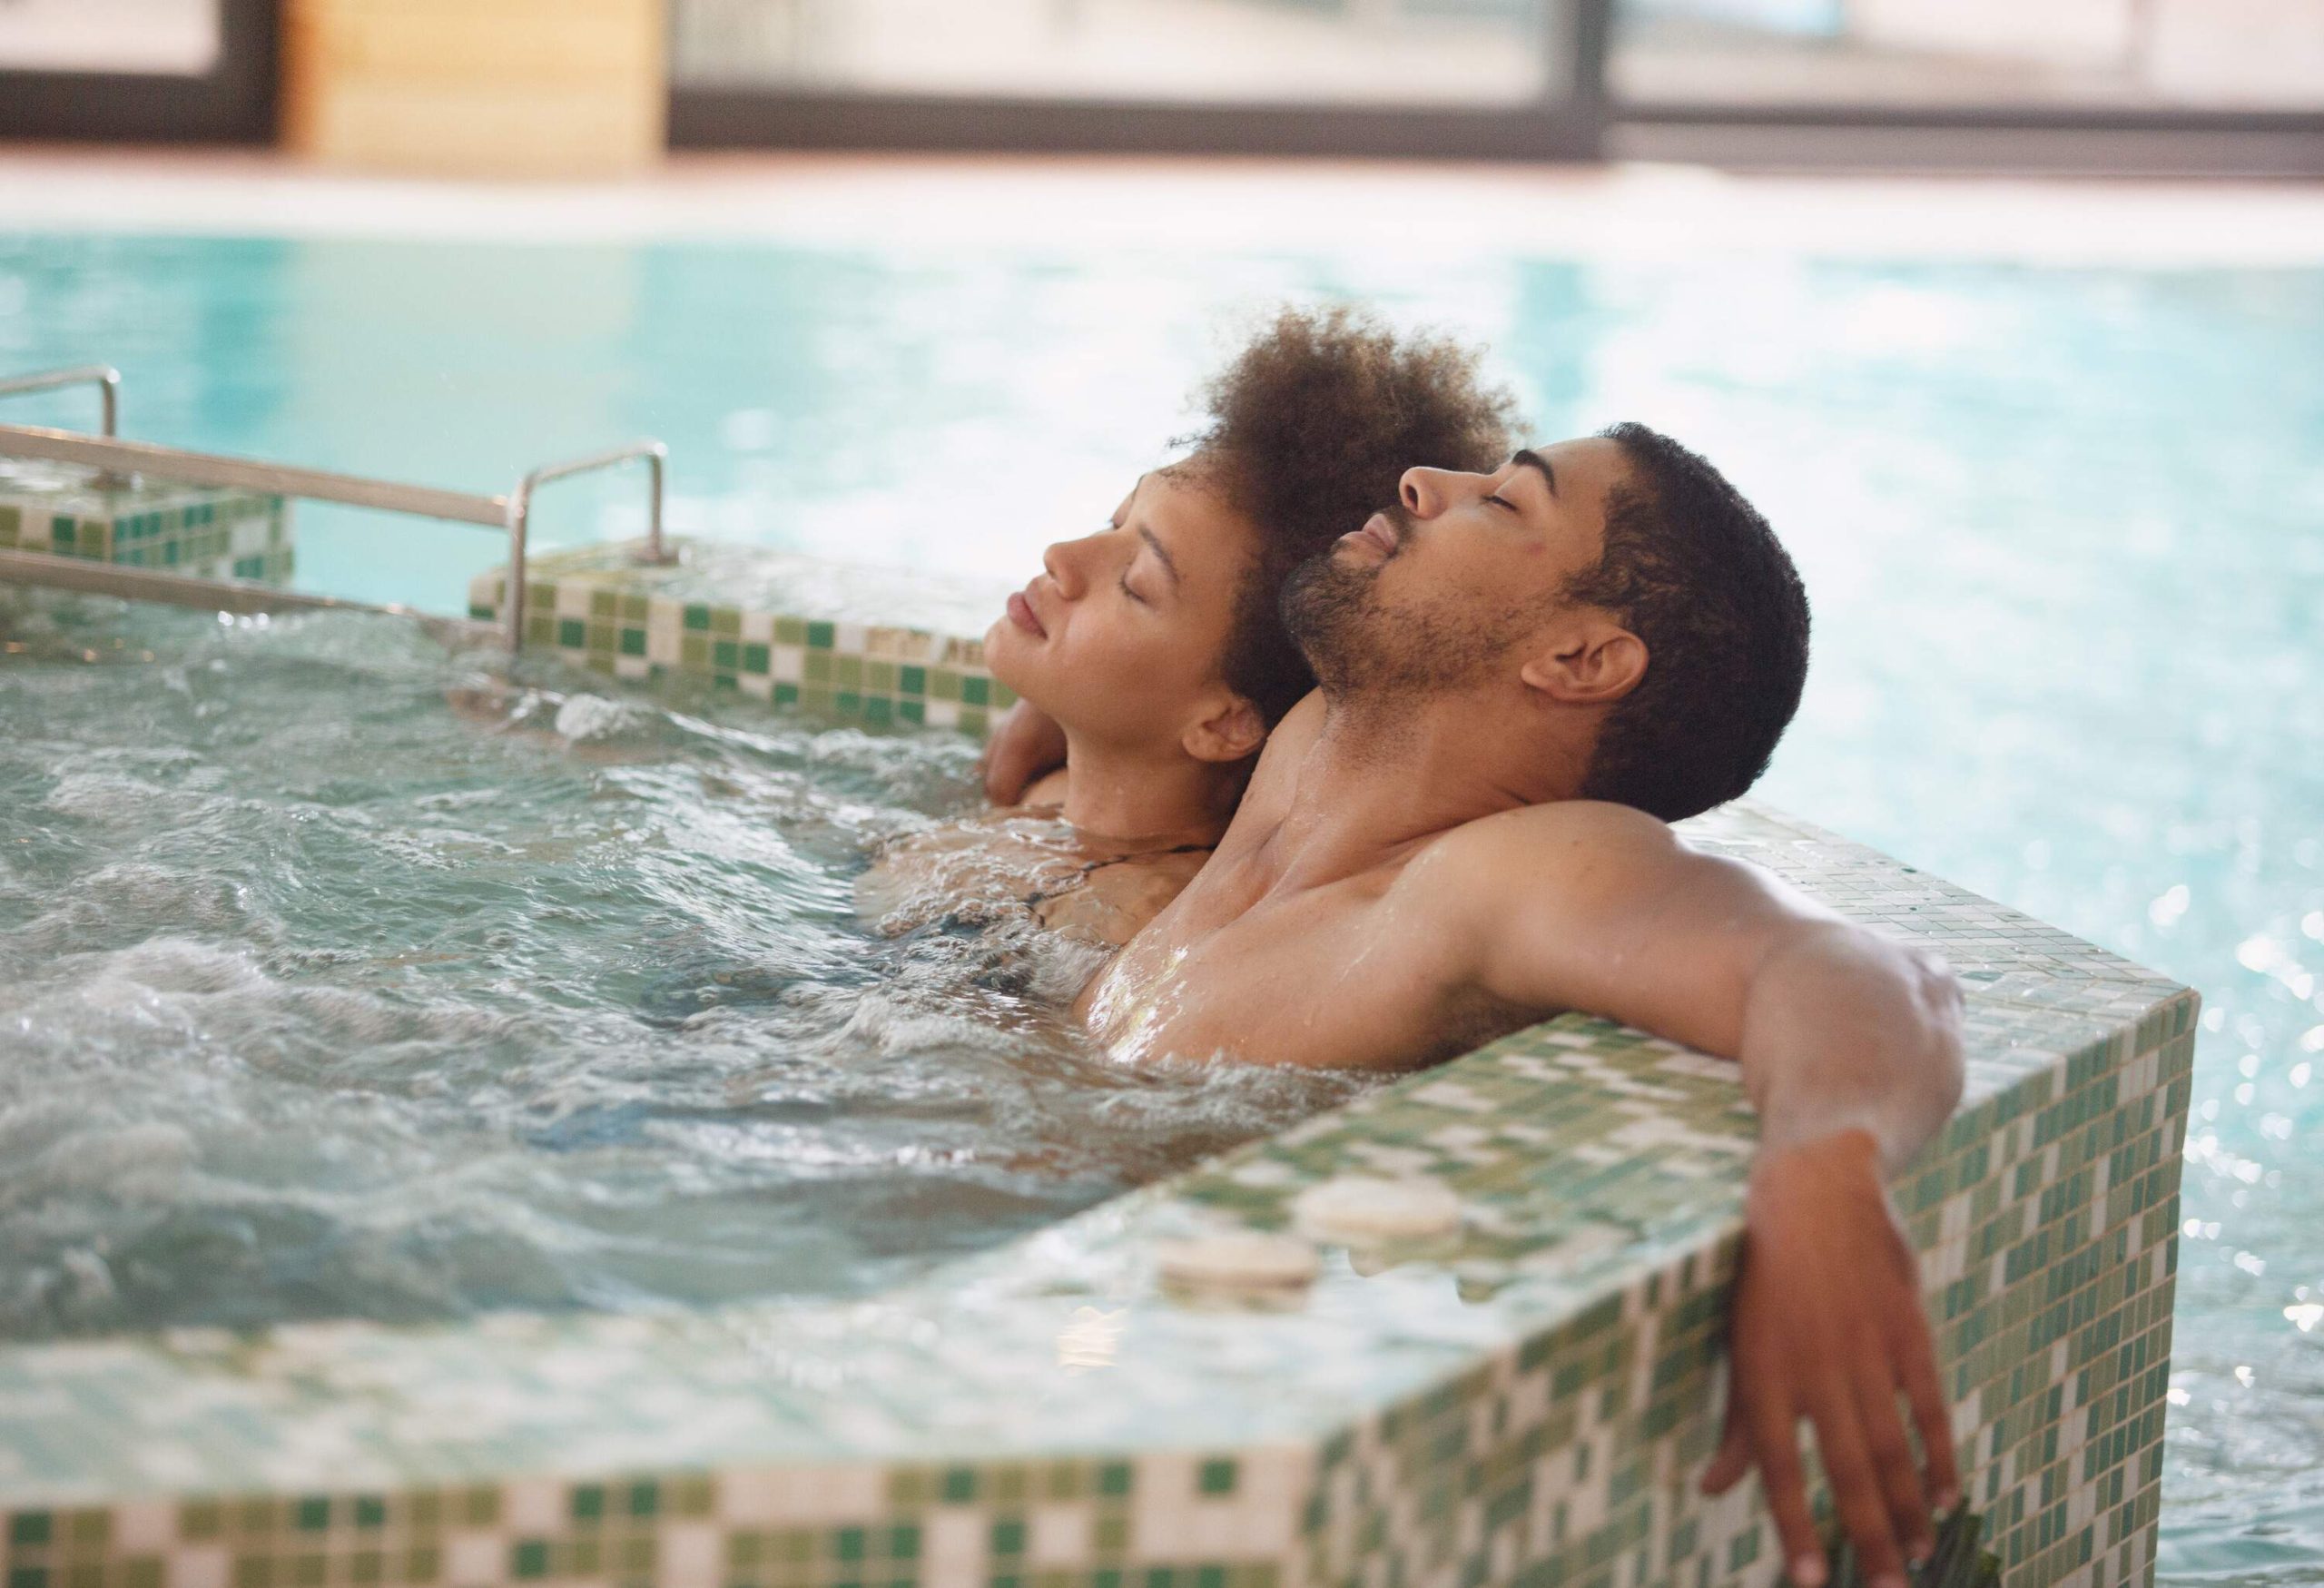 A couple relaxes in a hot tub with their eyes closed.